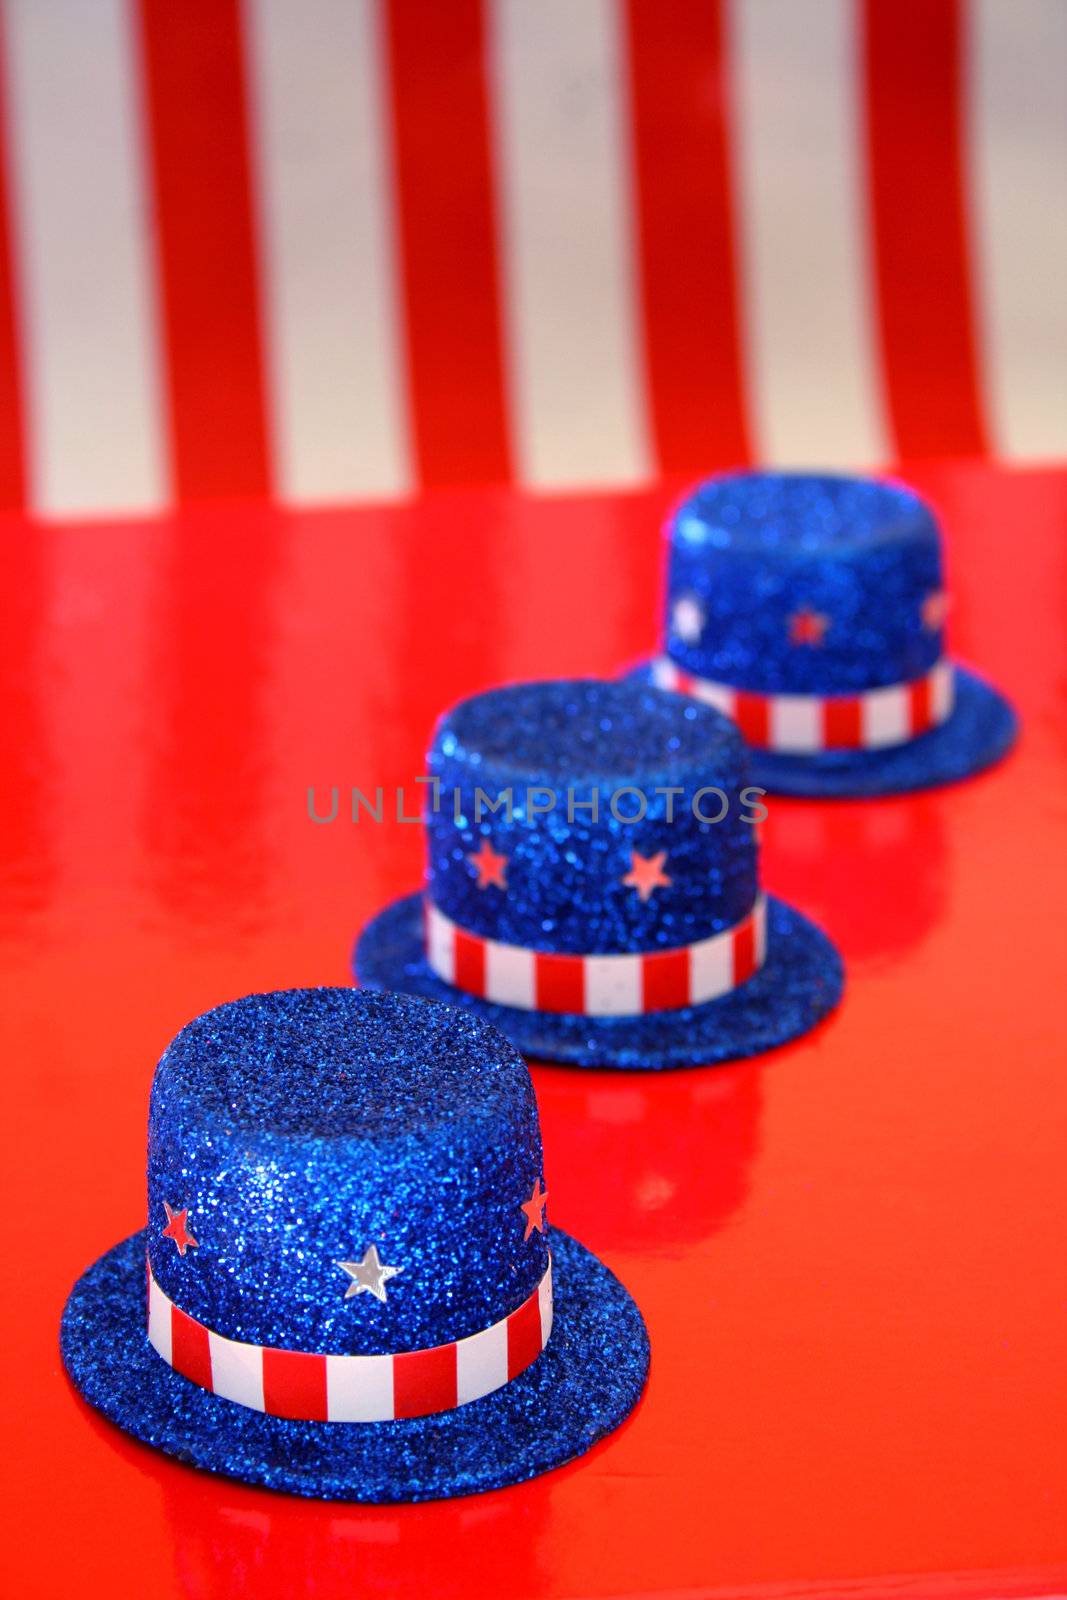 Three top hats with fourth of July theme on a red background.

